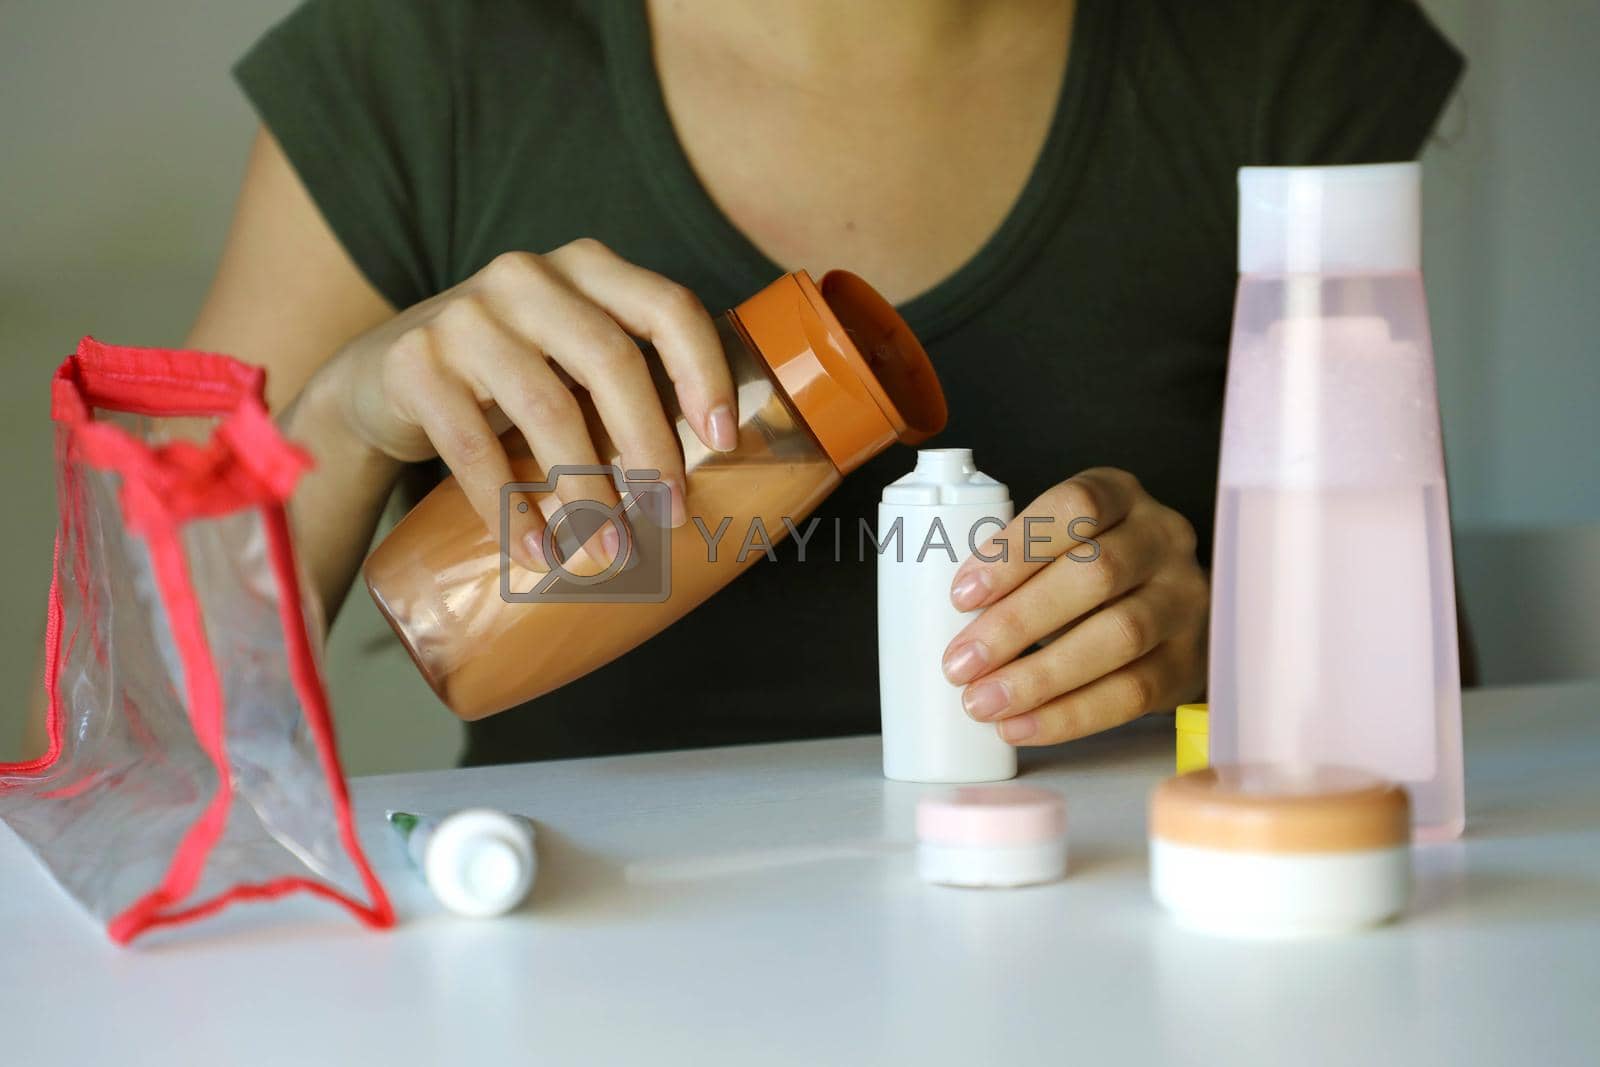 Travel kit for transporting cosmetics on airplane. Woman poured cosmetics liquid into small bottles preparing travel kit for transporting on airplane.